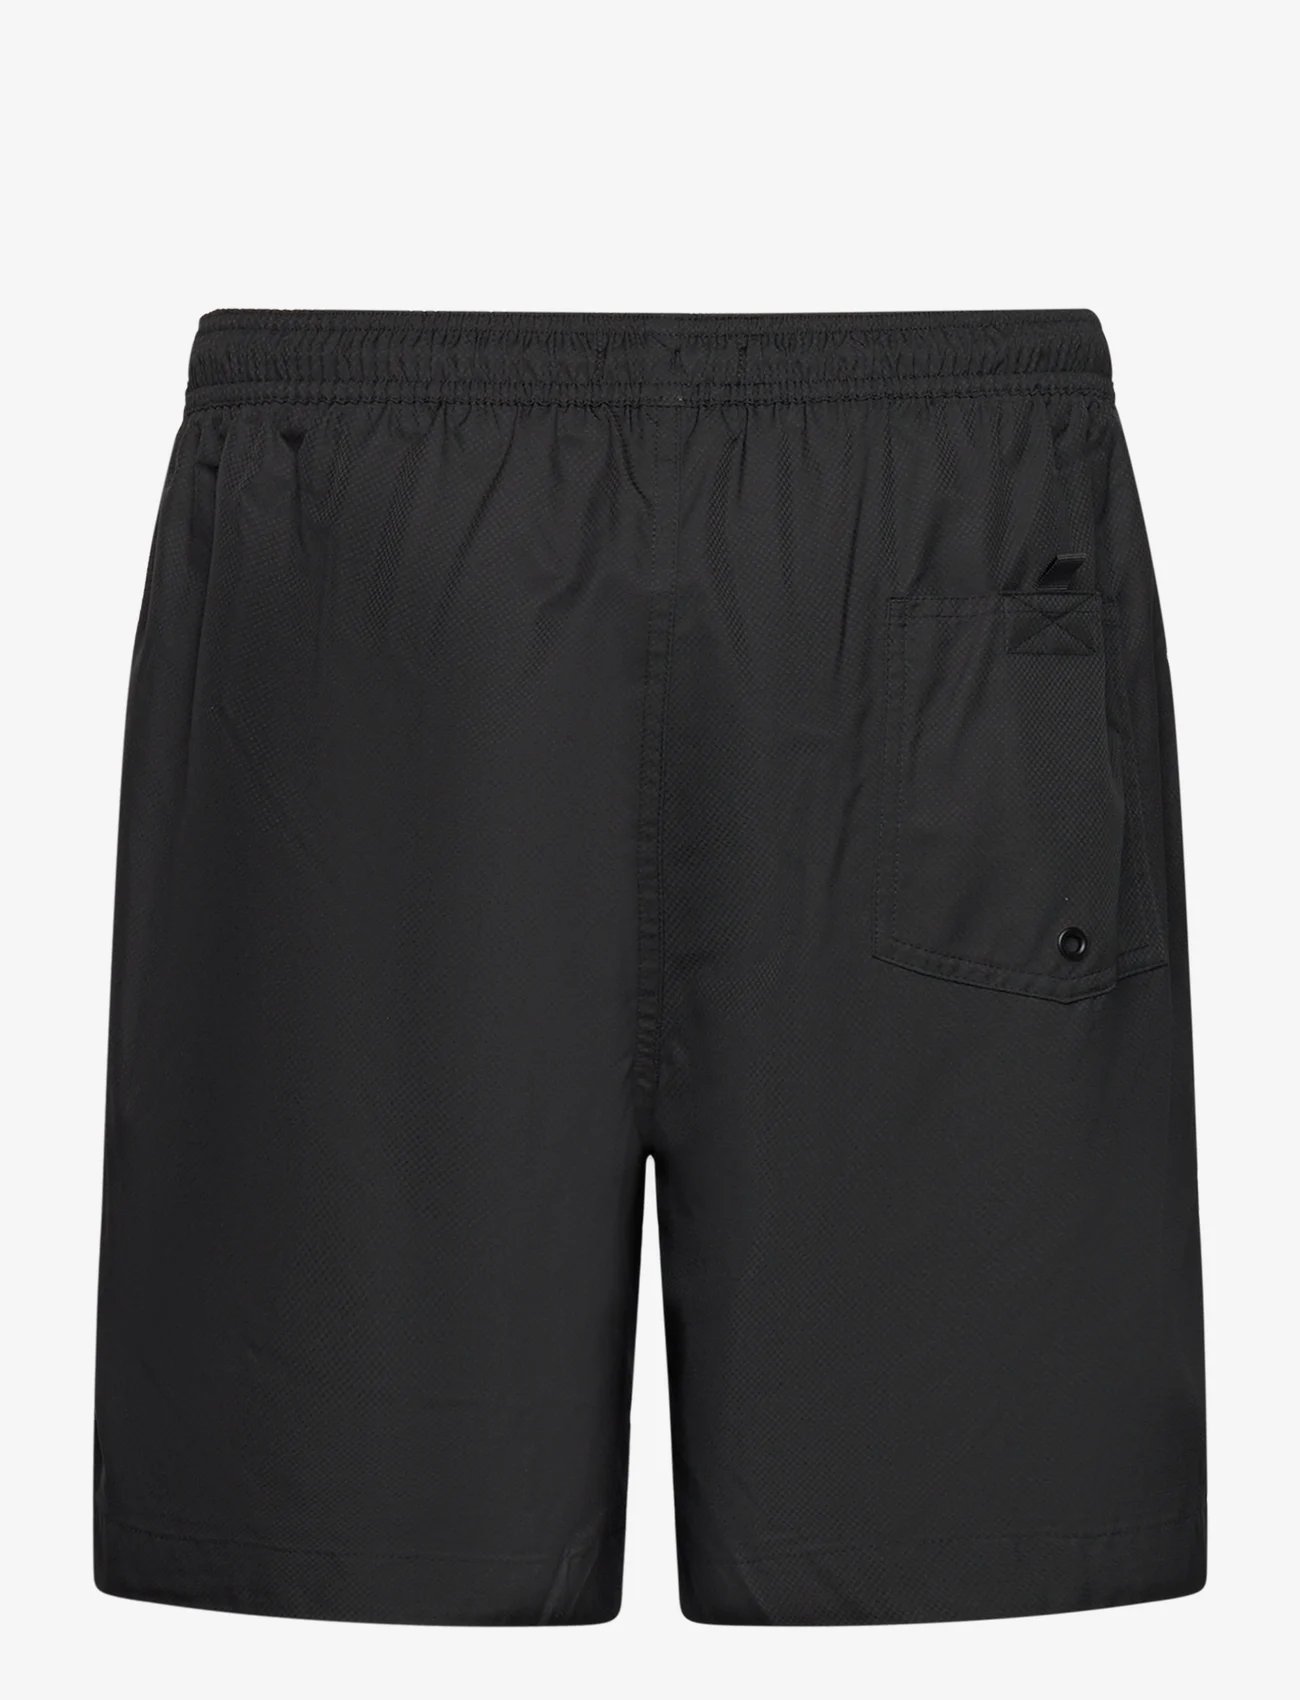 Fred Perry - CLASSIC SWIMSHORT - badeshorts - black - 1